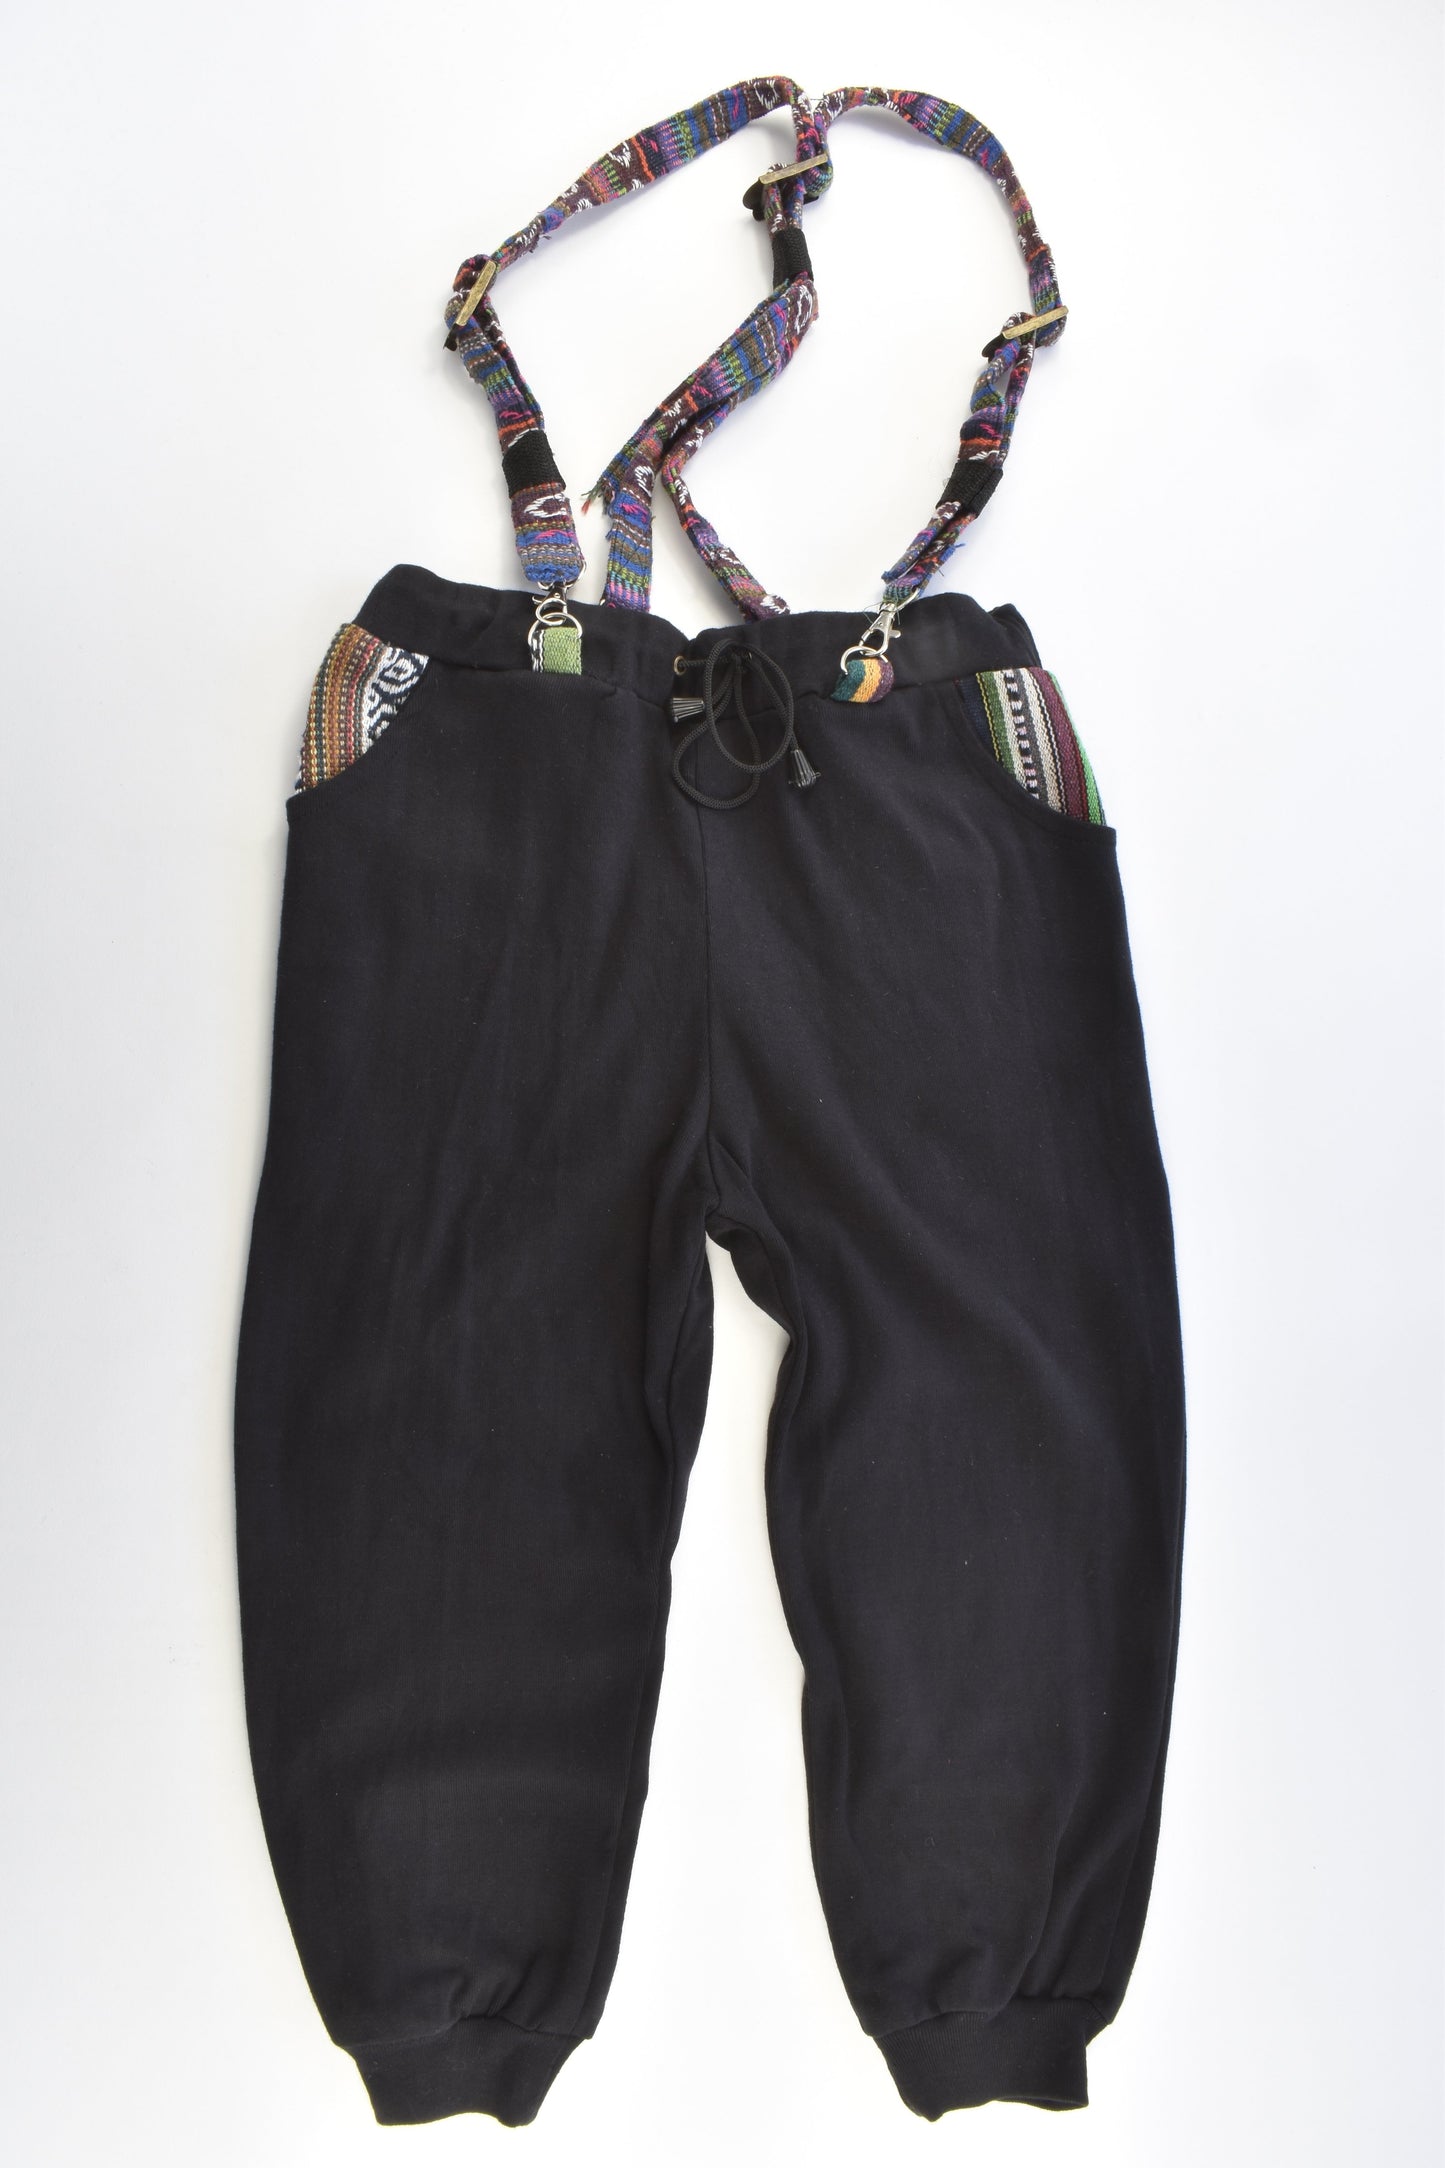 Anjel Ms Size approx 5-6 Baggy Loose Fit Nepal Suspender Pants